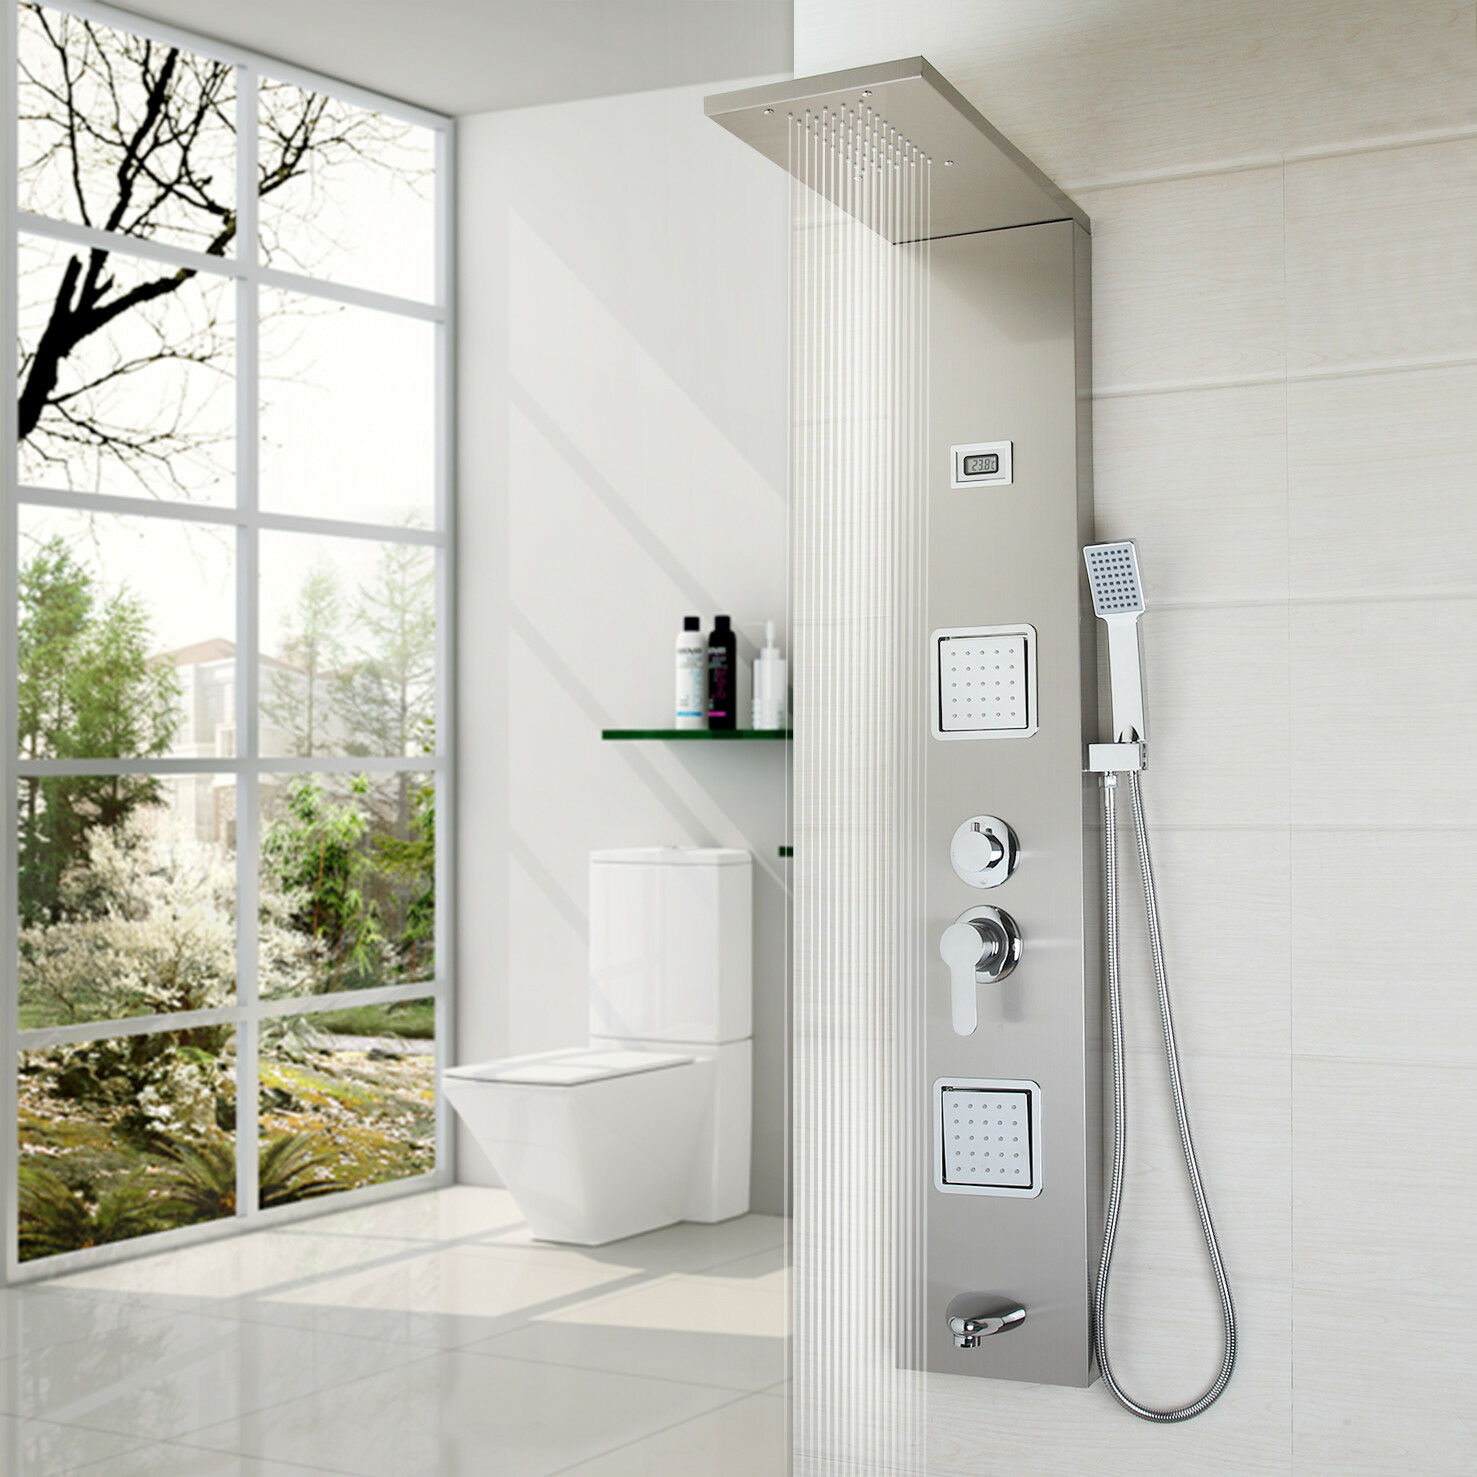 Fontana Digital Screen Temperature Control Shower Panel With Handshower And Tub Spout